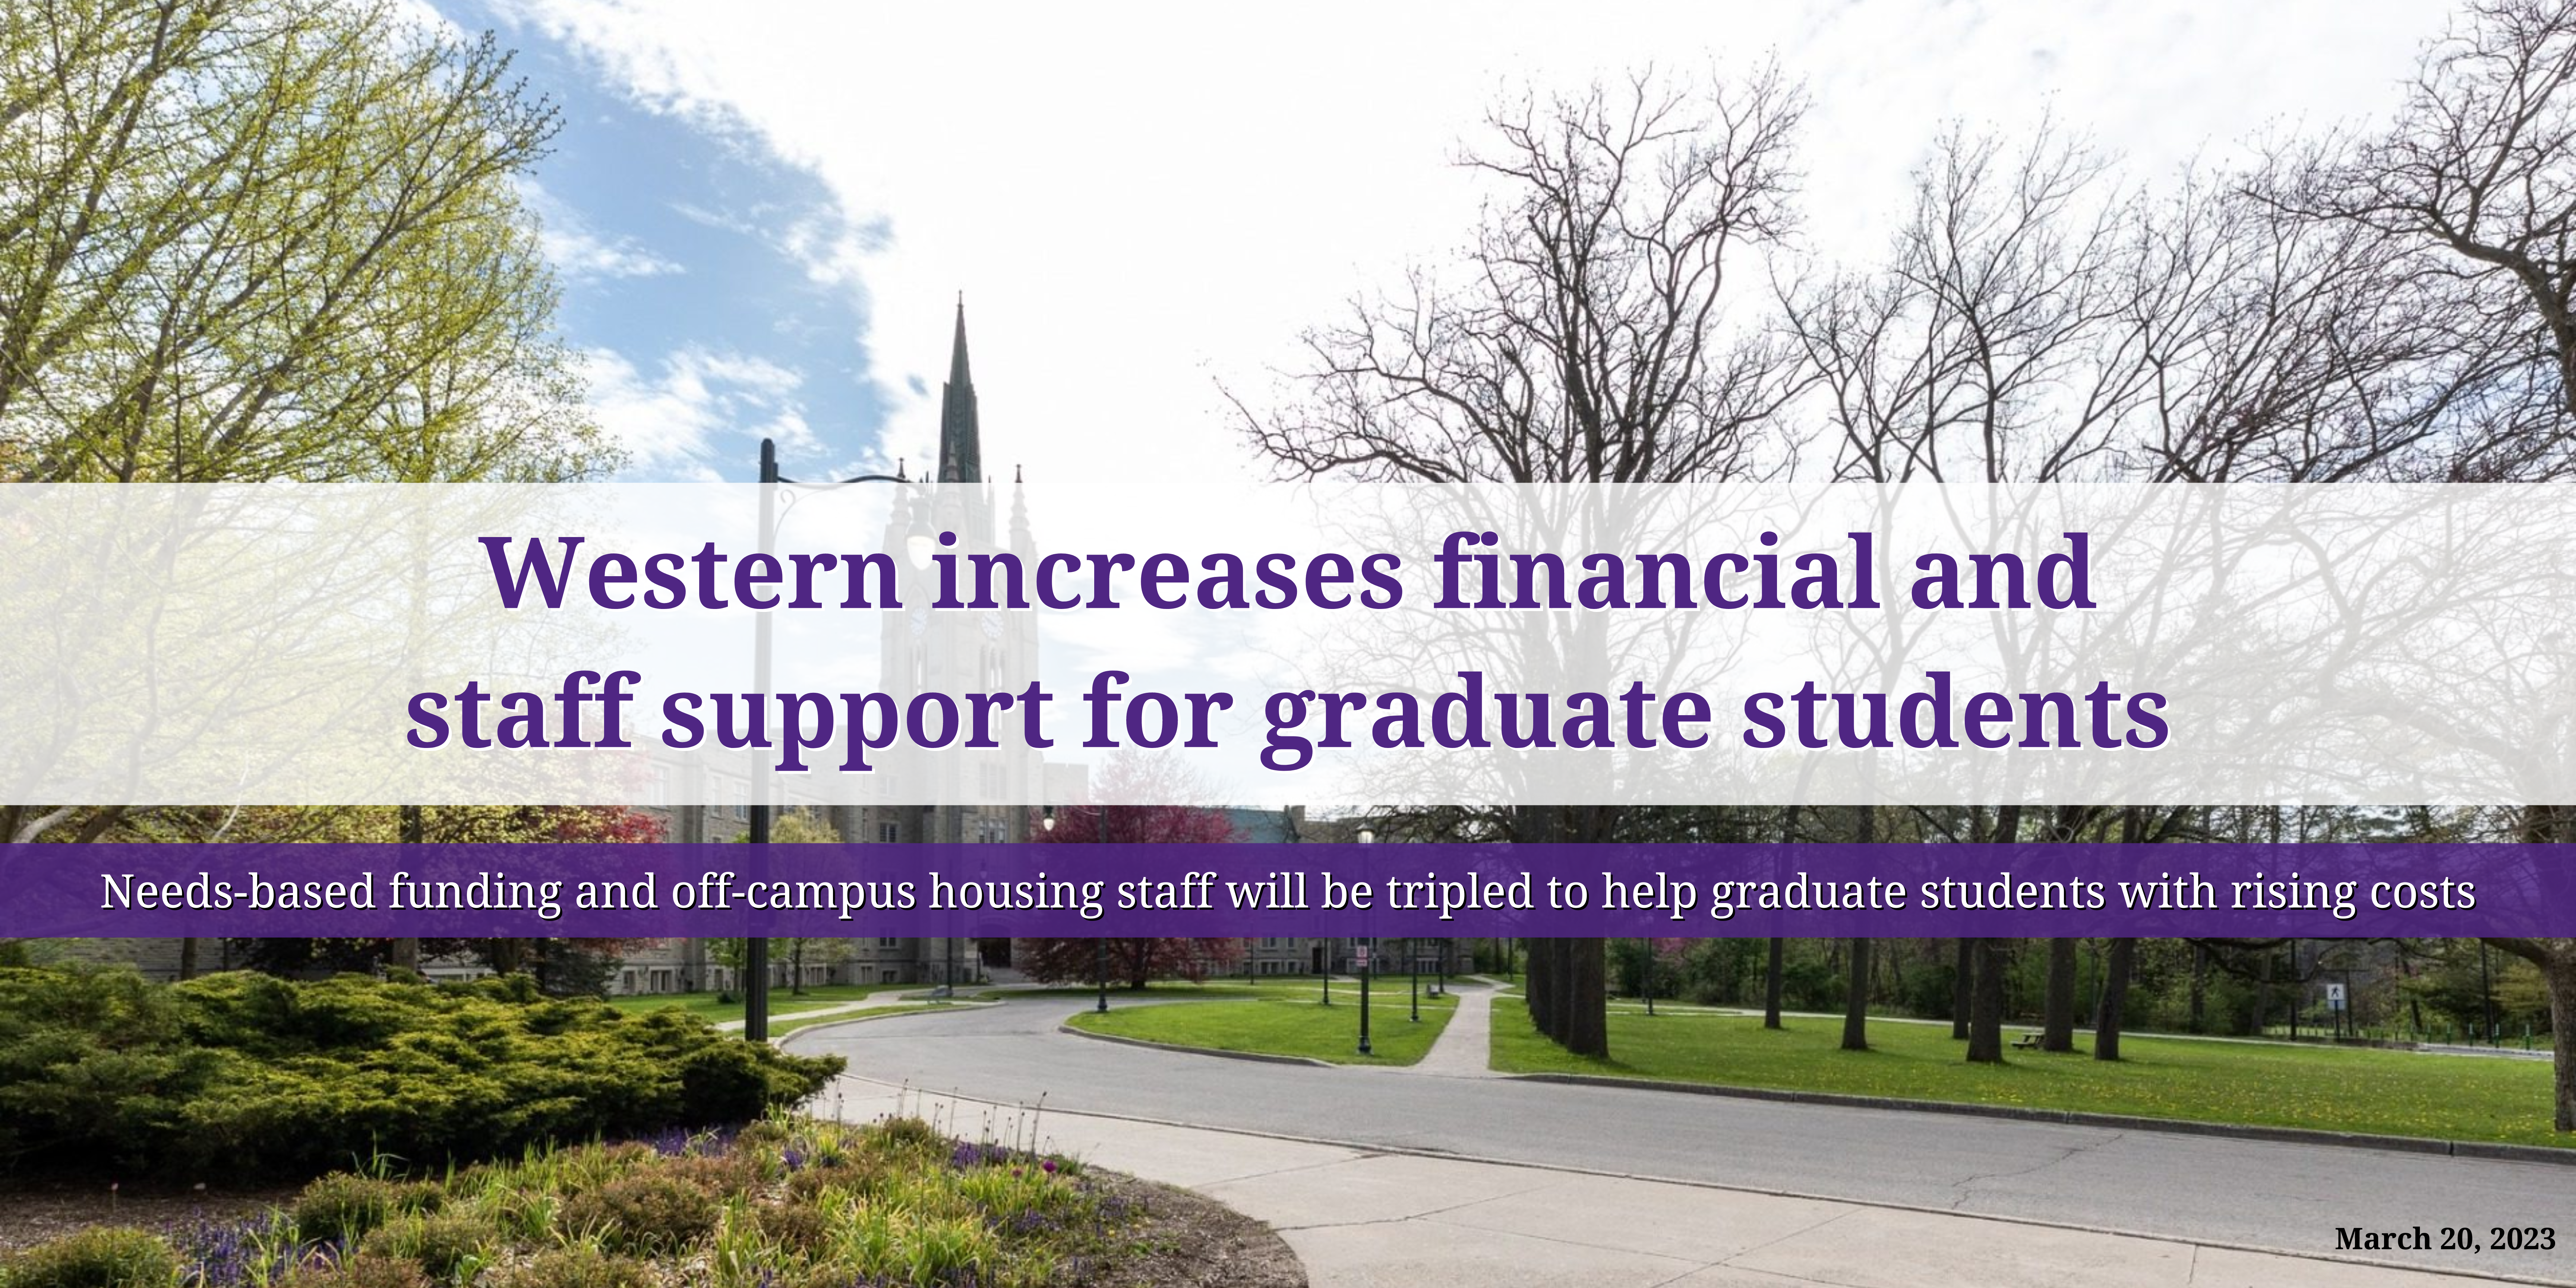 Western increases financial and staff support for graduate students